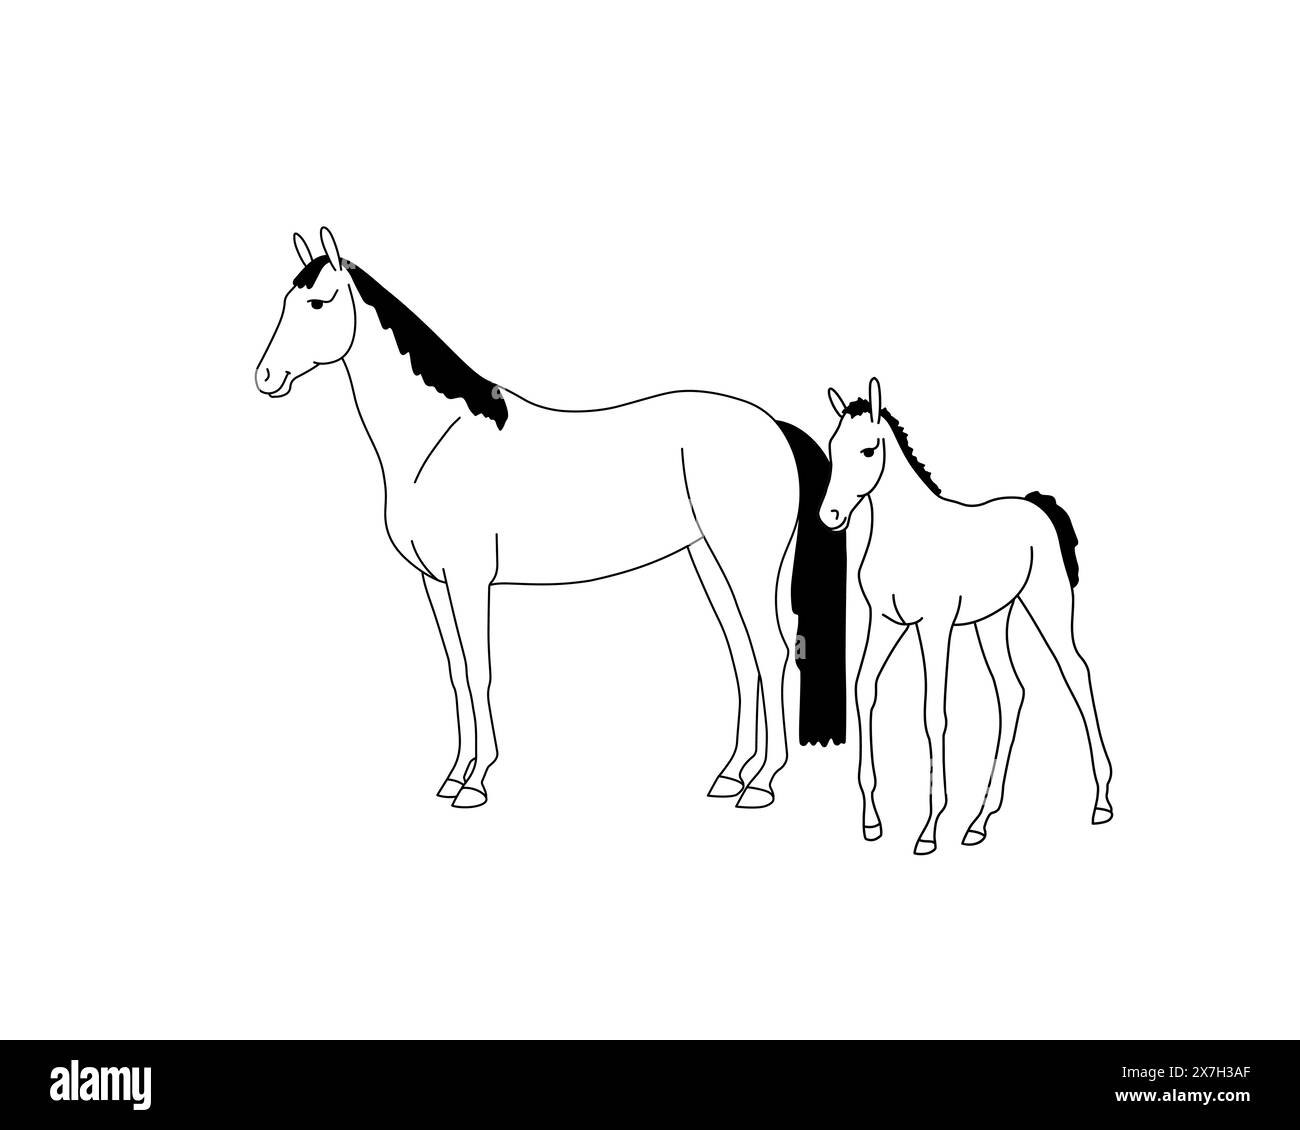 Horses baby with his mother, cute family illustration. Vector illustration Stock Vector